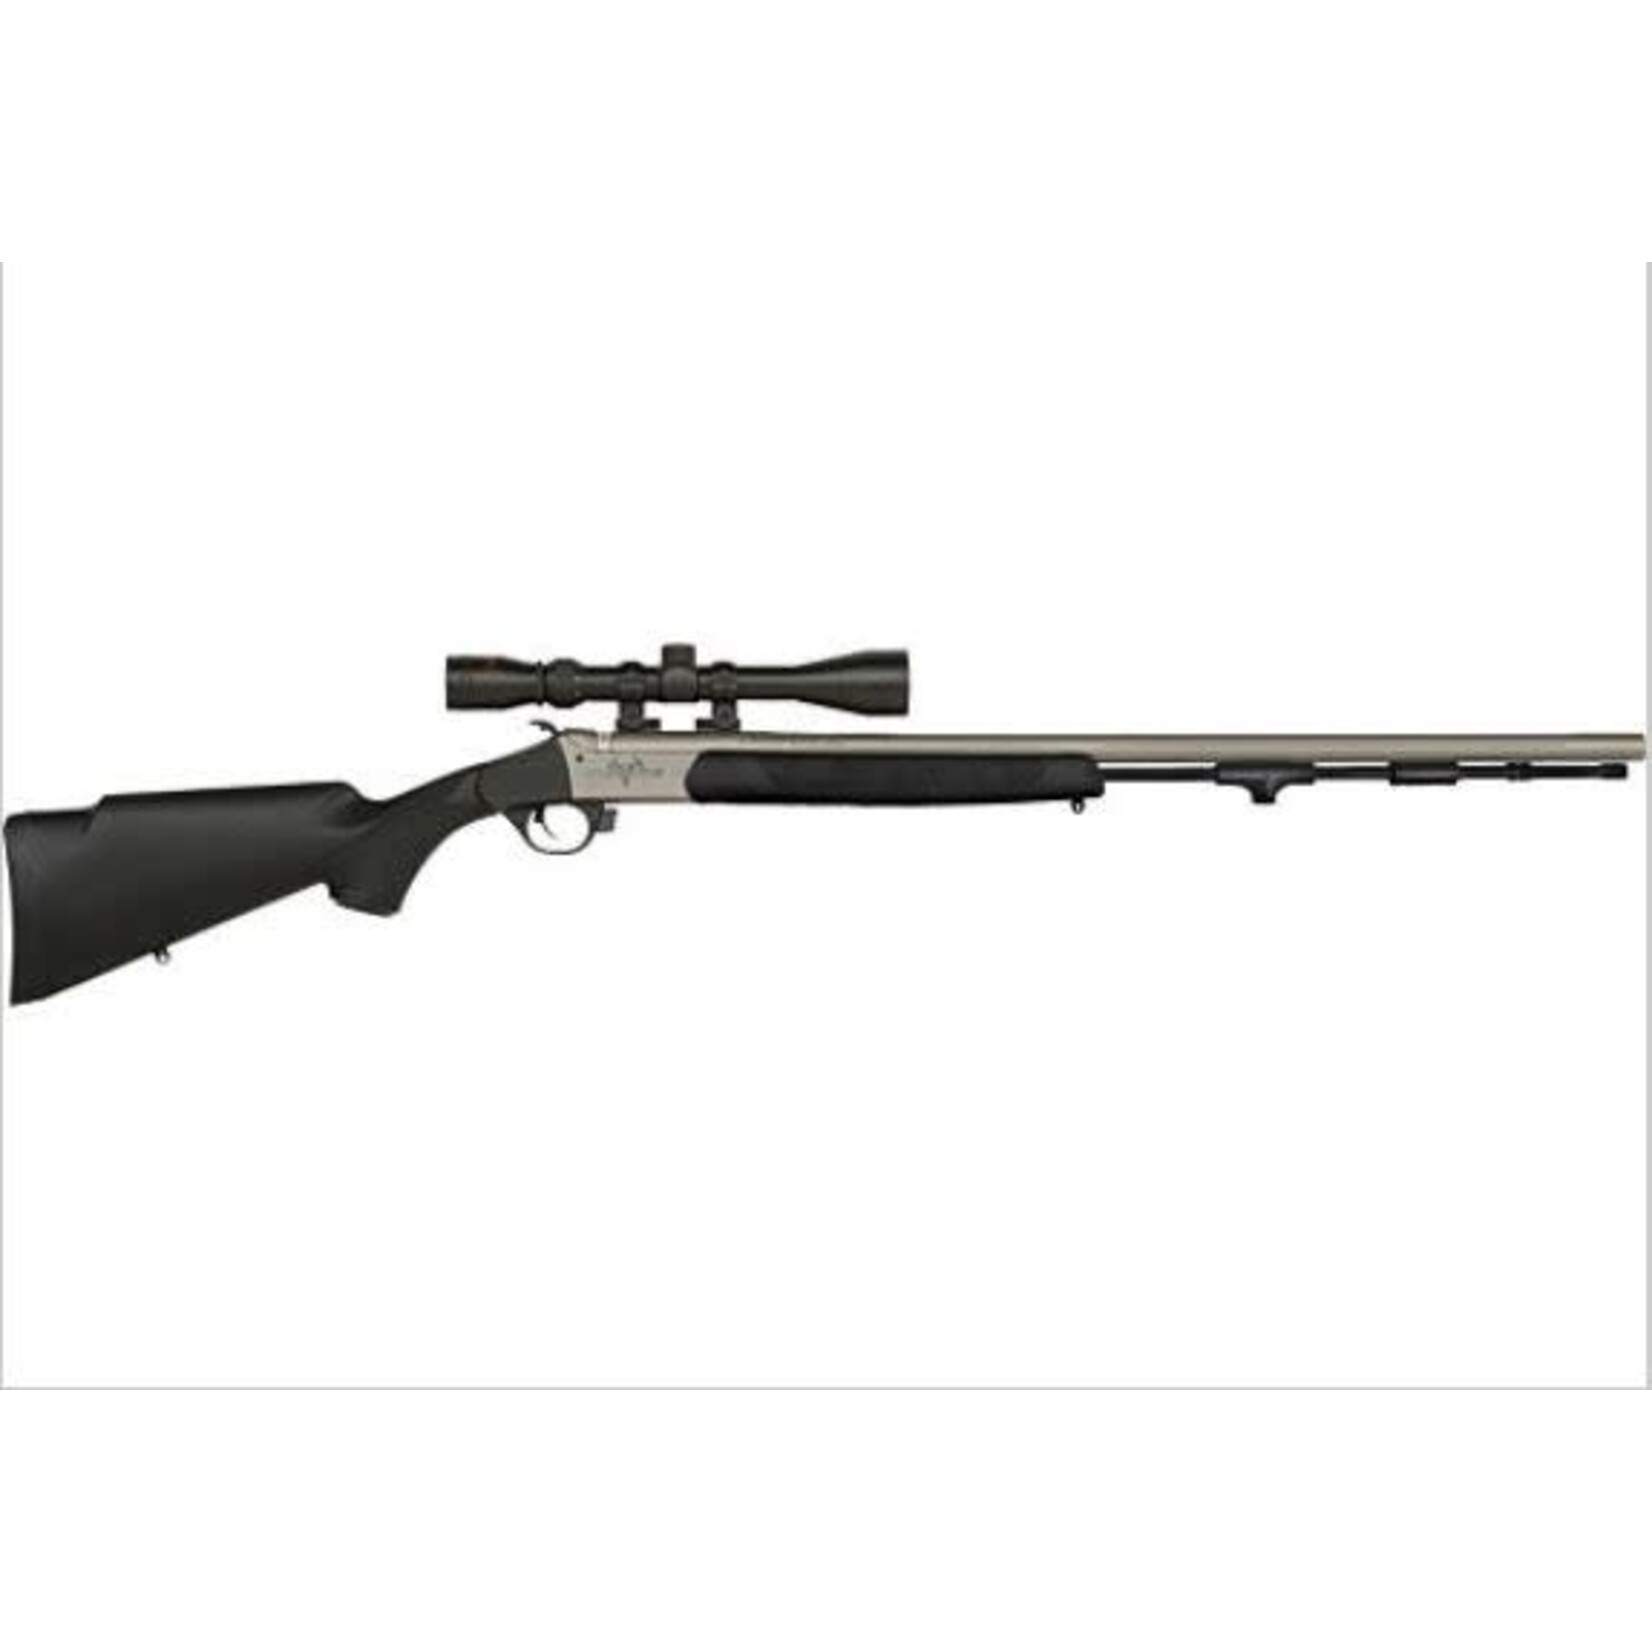 TRADITIONS Traditions Pursuit XT Rifle w/ 3-9x40 Scope 50cal 26" Cerakote SS Synthetic